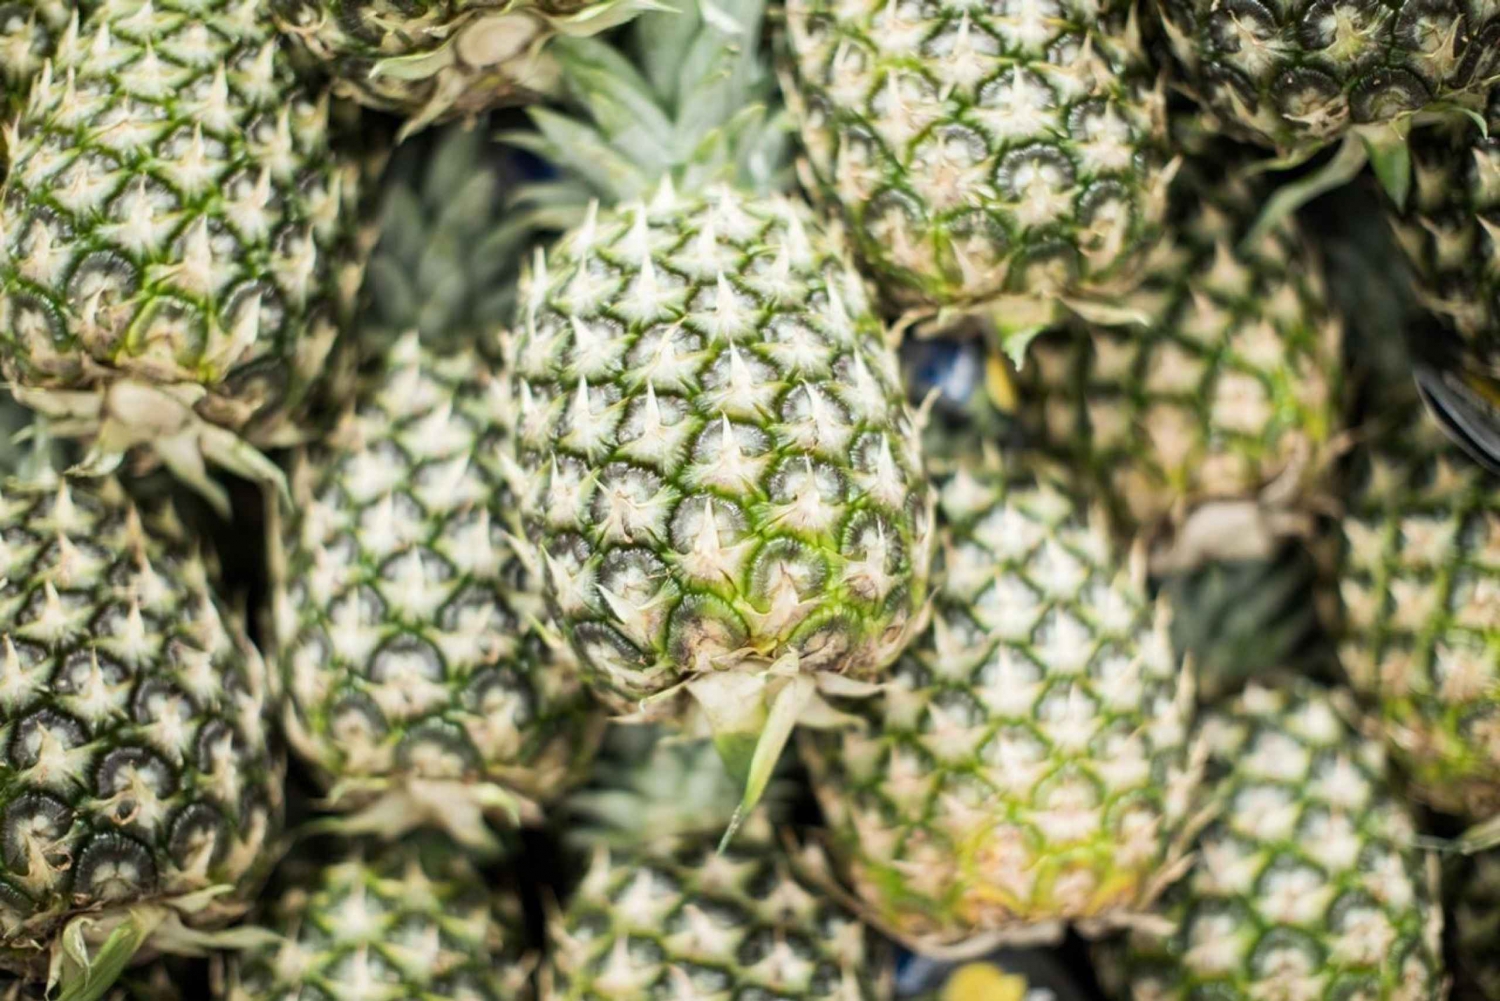 Pineapples: Welcome to the Best Organic Pineapple Tour